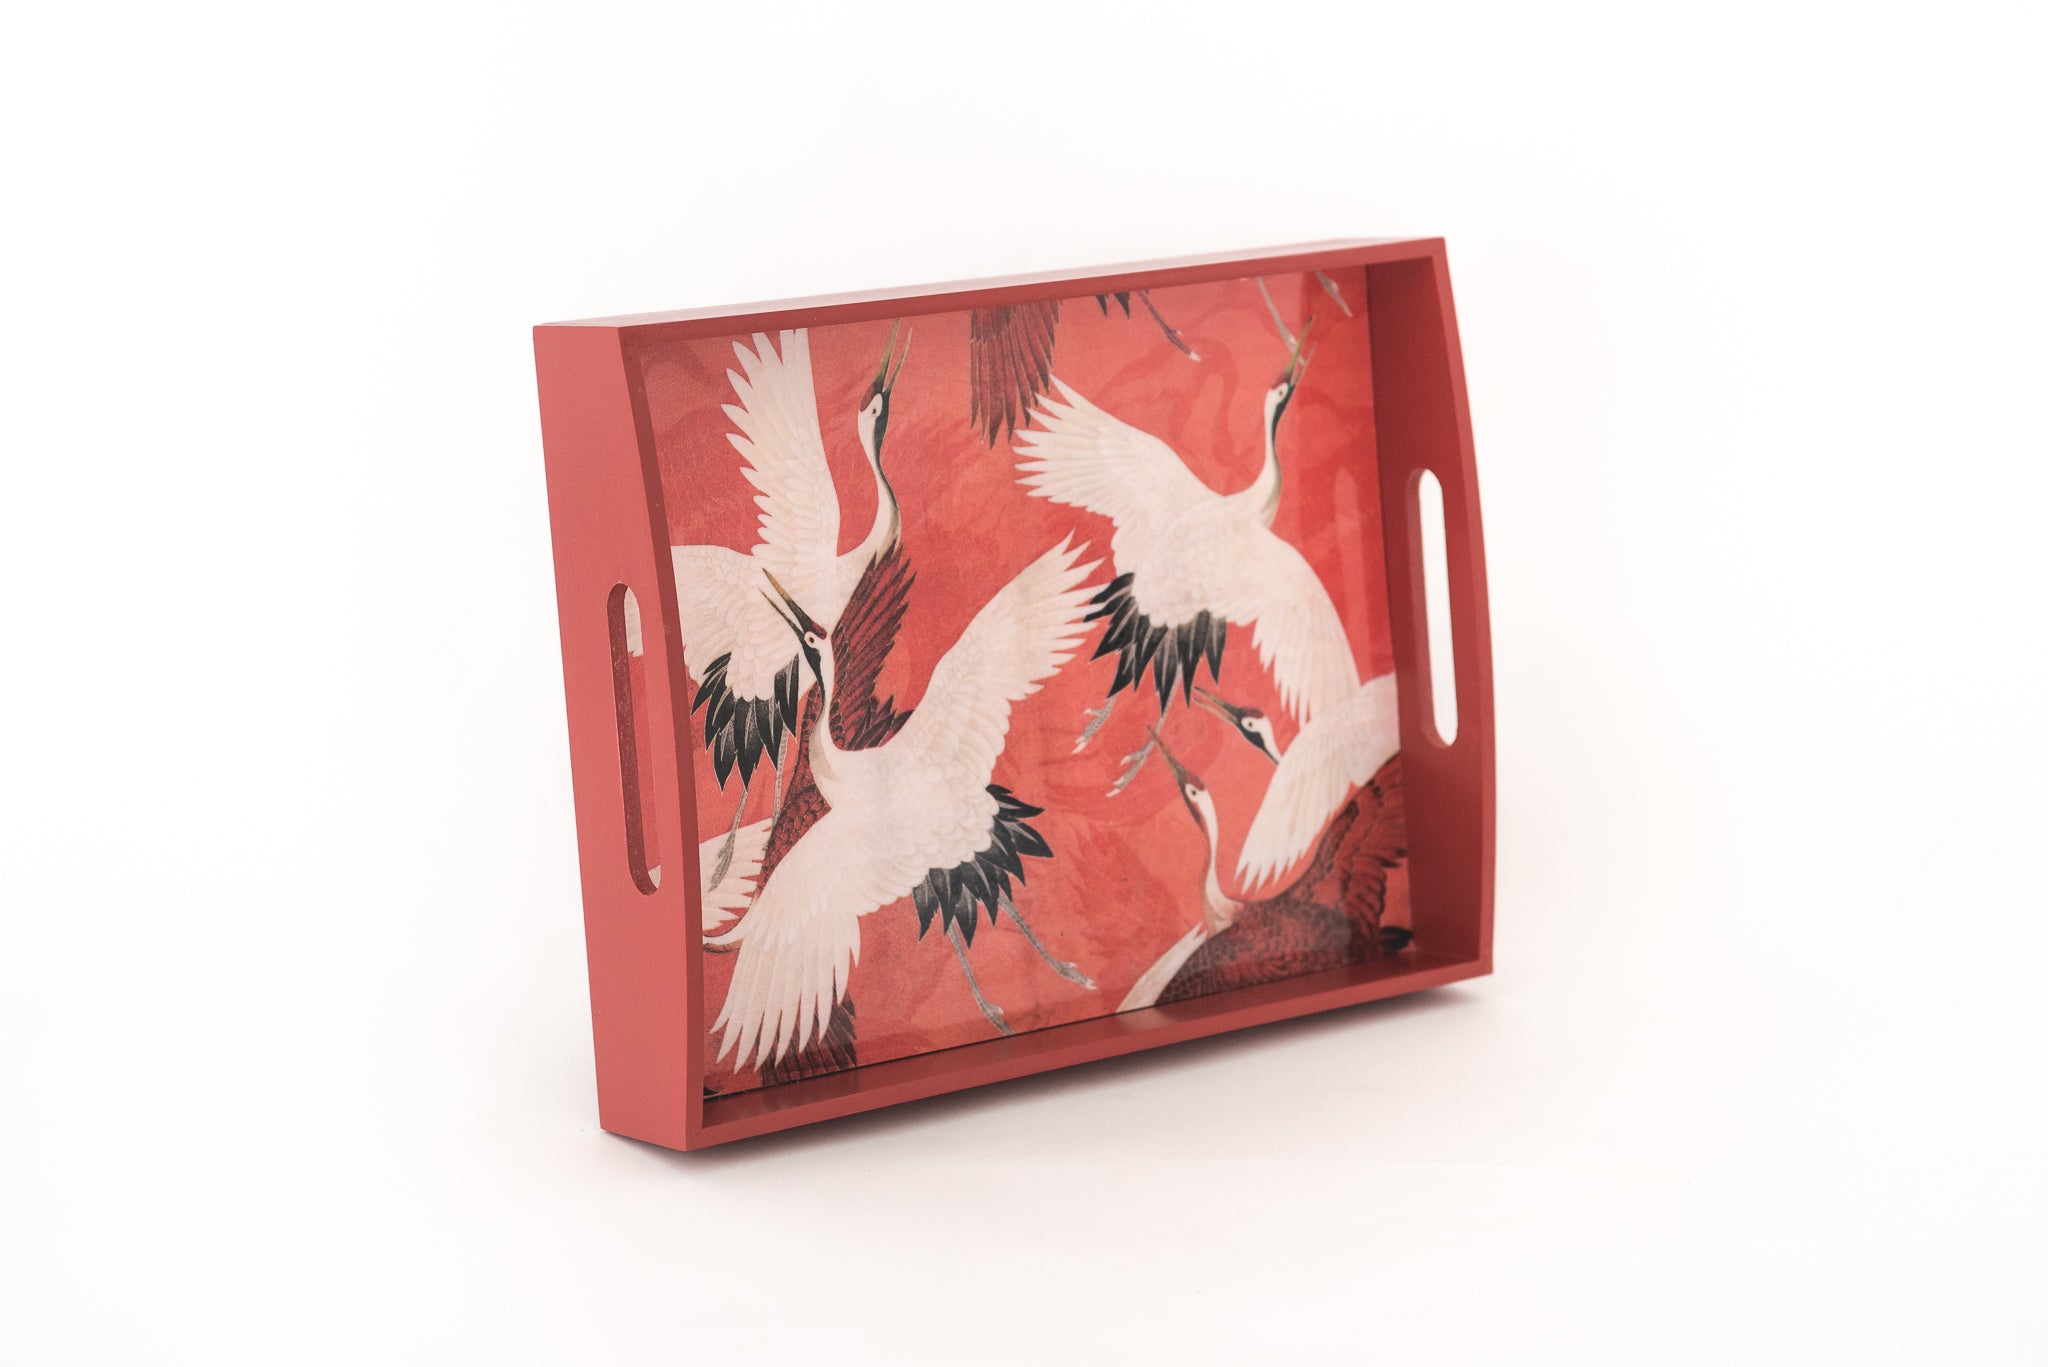 Wooden Serving Tray Red Crane